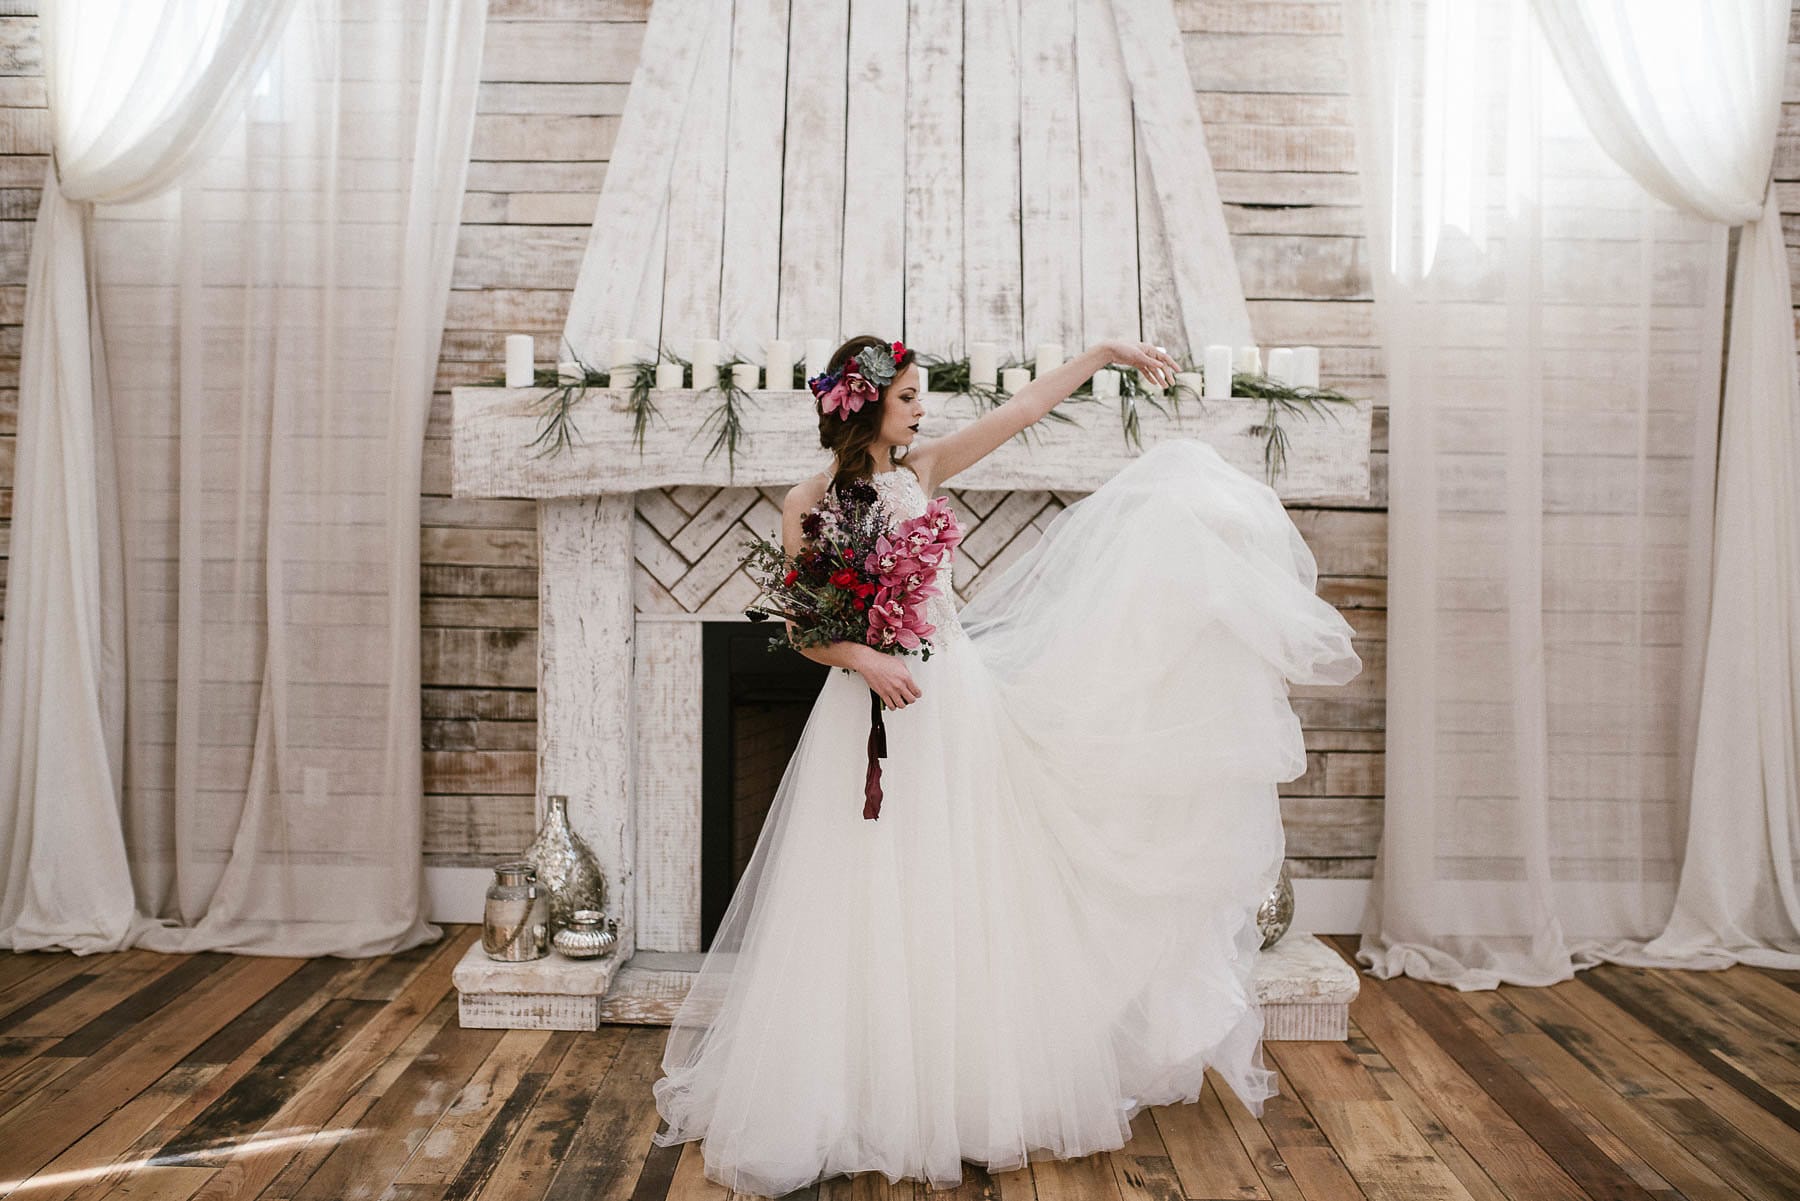 Princess Wedding Dress in Moody Styled Shoot With Jewel-toned Florals - Fall in Love with Gowns for the Romantic, Edgy, and Elegant Bride